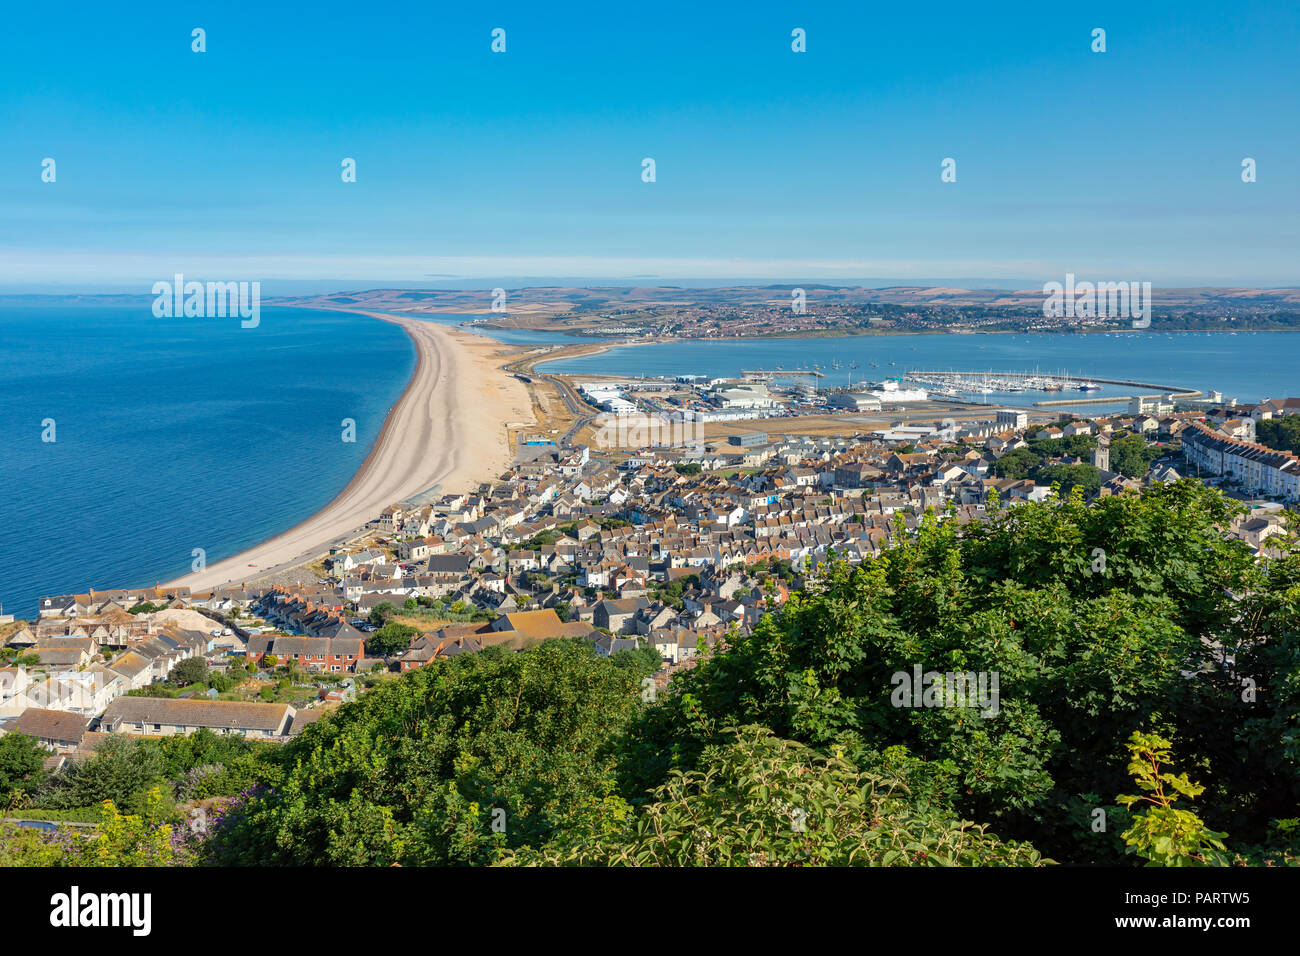 Portland Dorset England July 24, 2018 View from Portland Heights overlooking the town of Fortune's Well, showing Chesil Beach, Portland harbour and Th Stock Photo